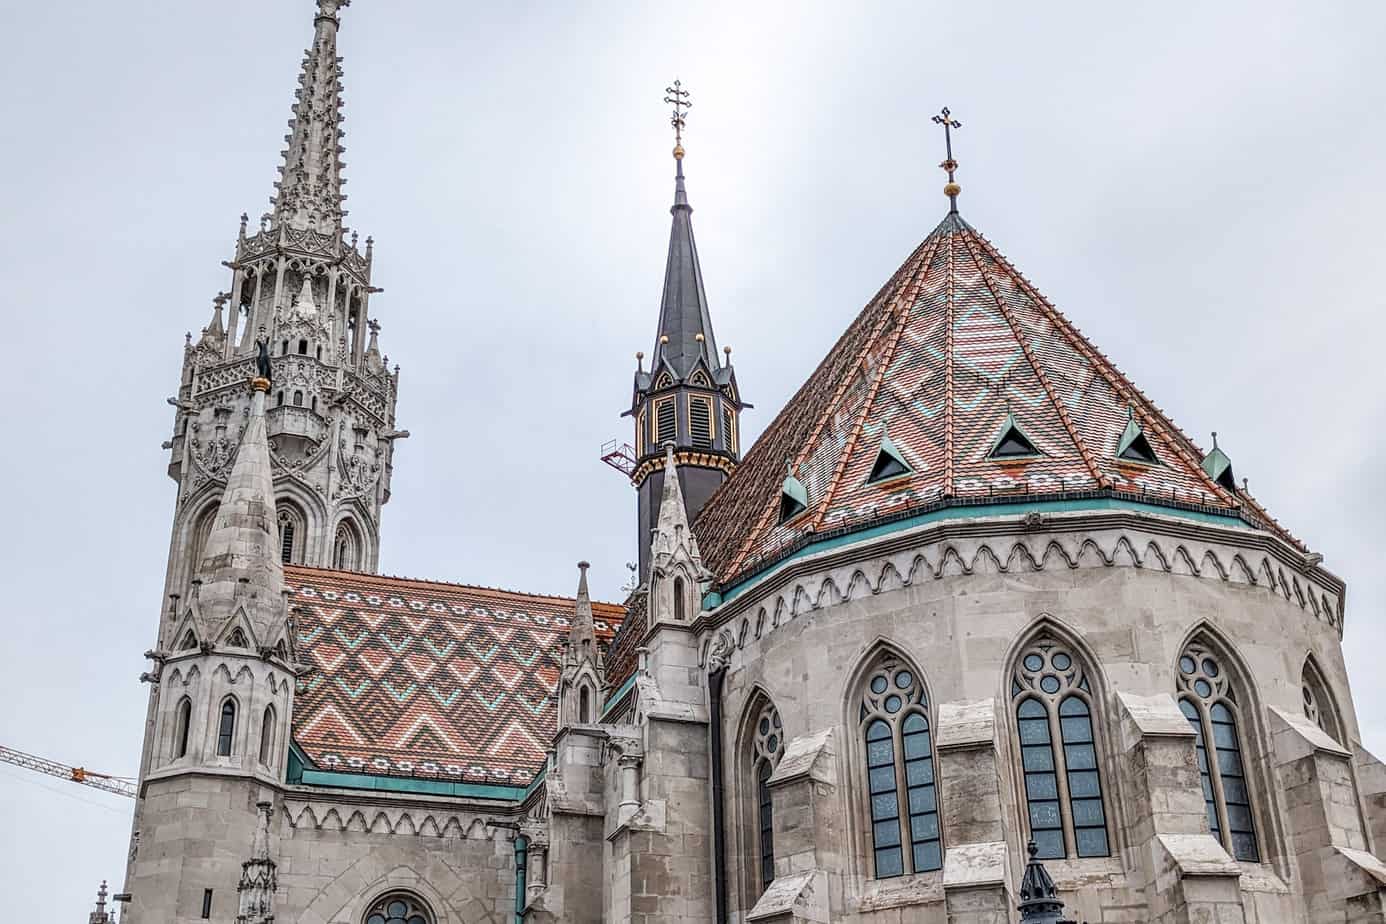 The tiled rooftop of Matthias Church with geometric shapes in red, white, and teal tiles.